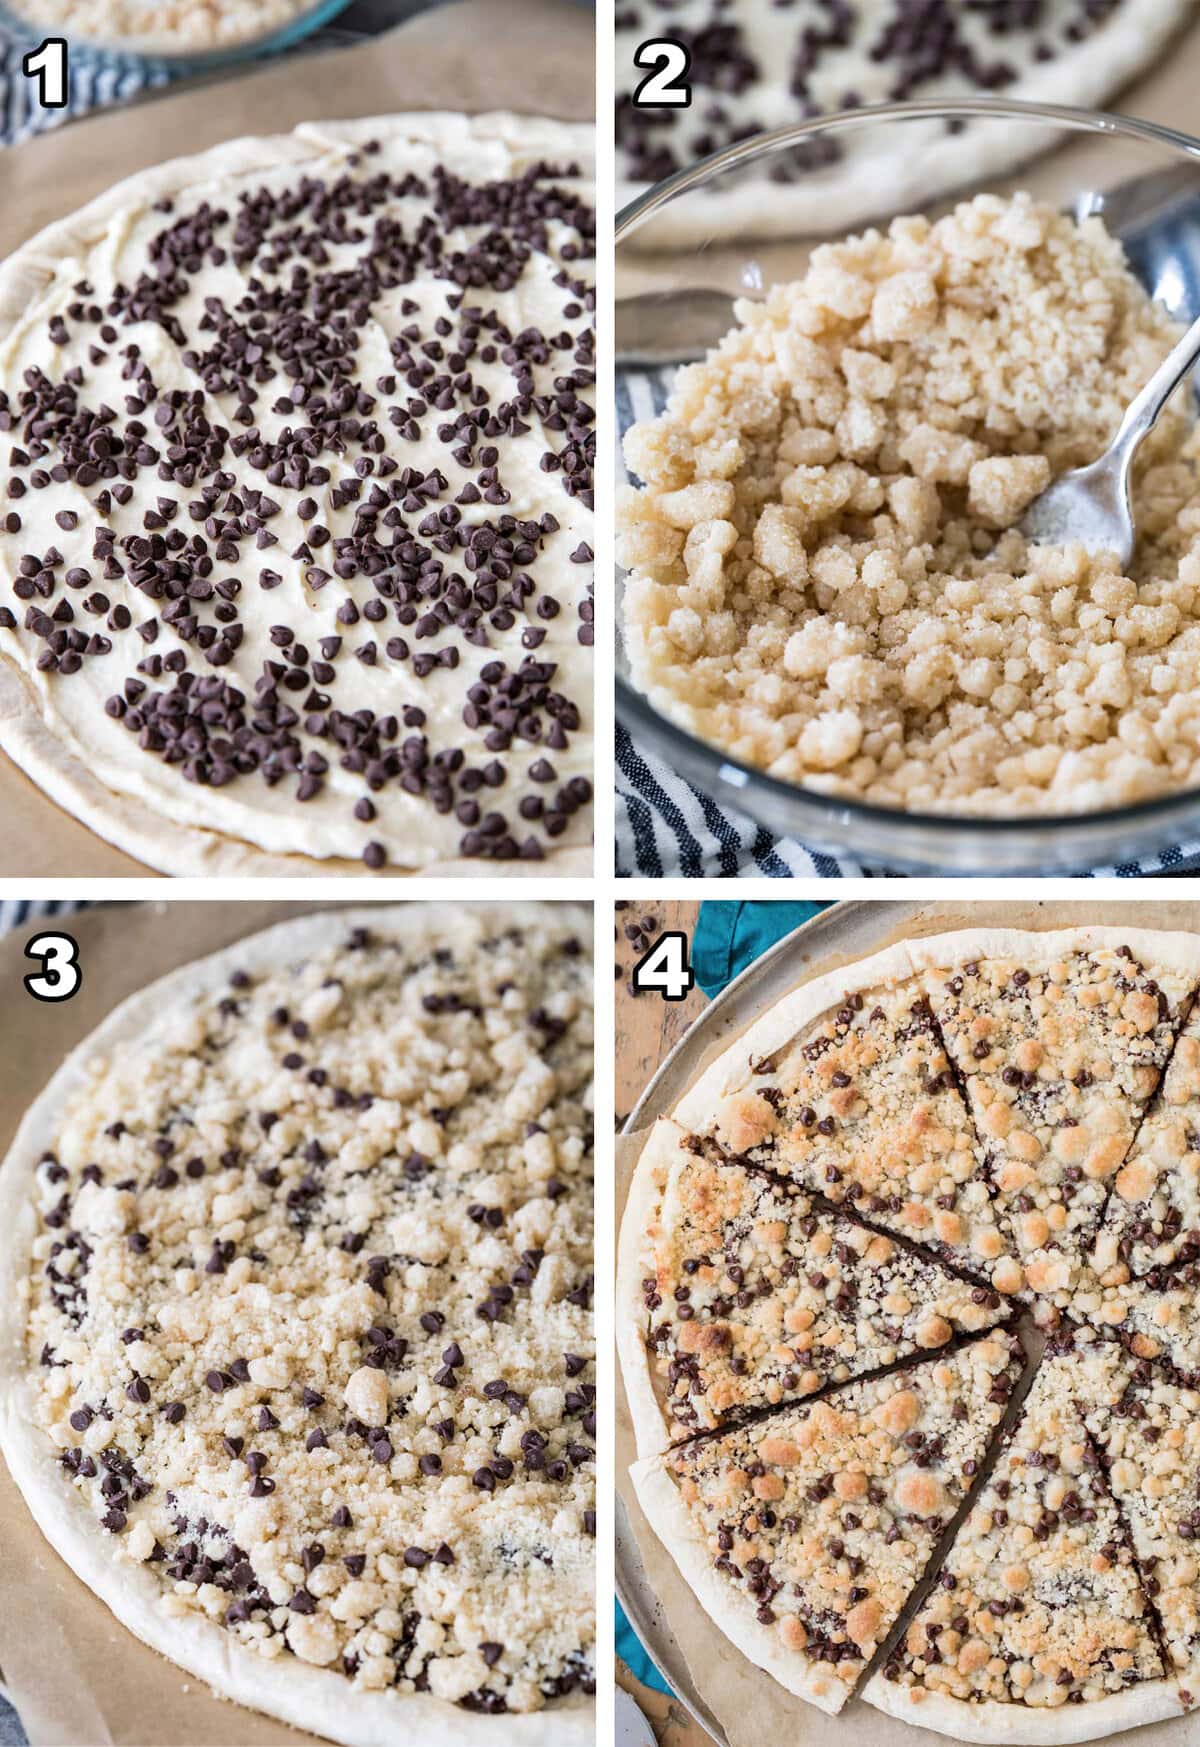 Collage of four images showing pizza dough being topped with cream cheese sauce, chocolate chips, and streusel before being baked and sliced.